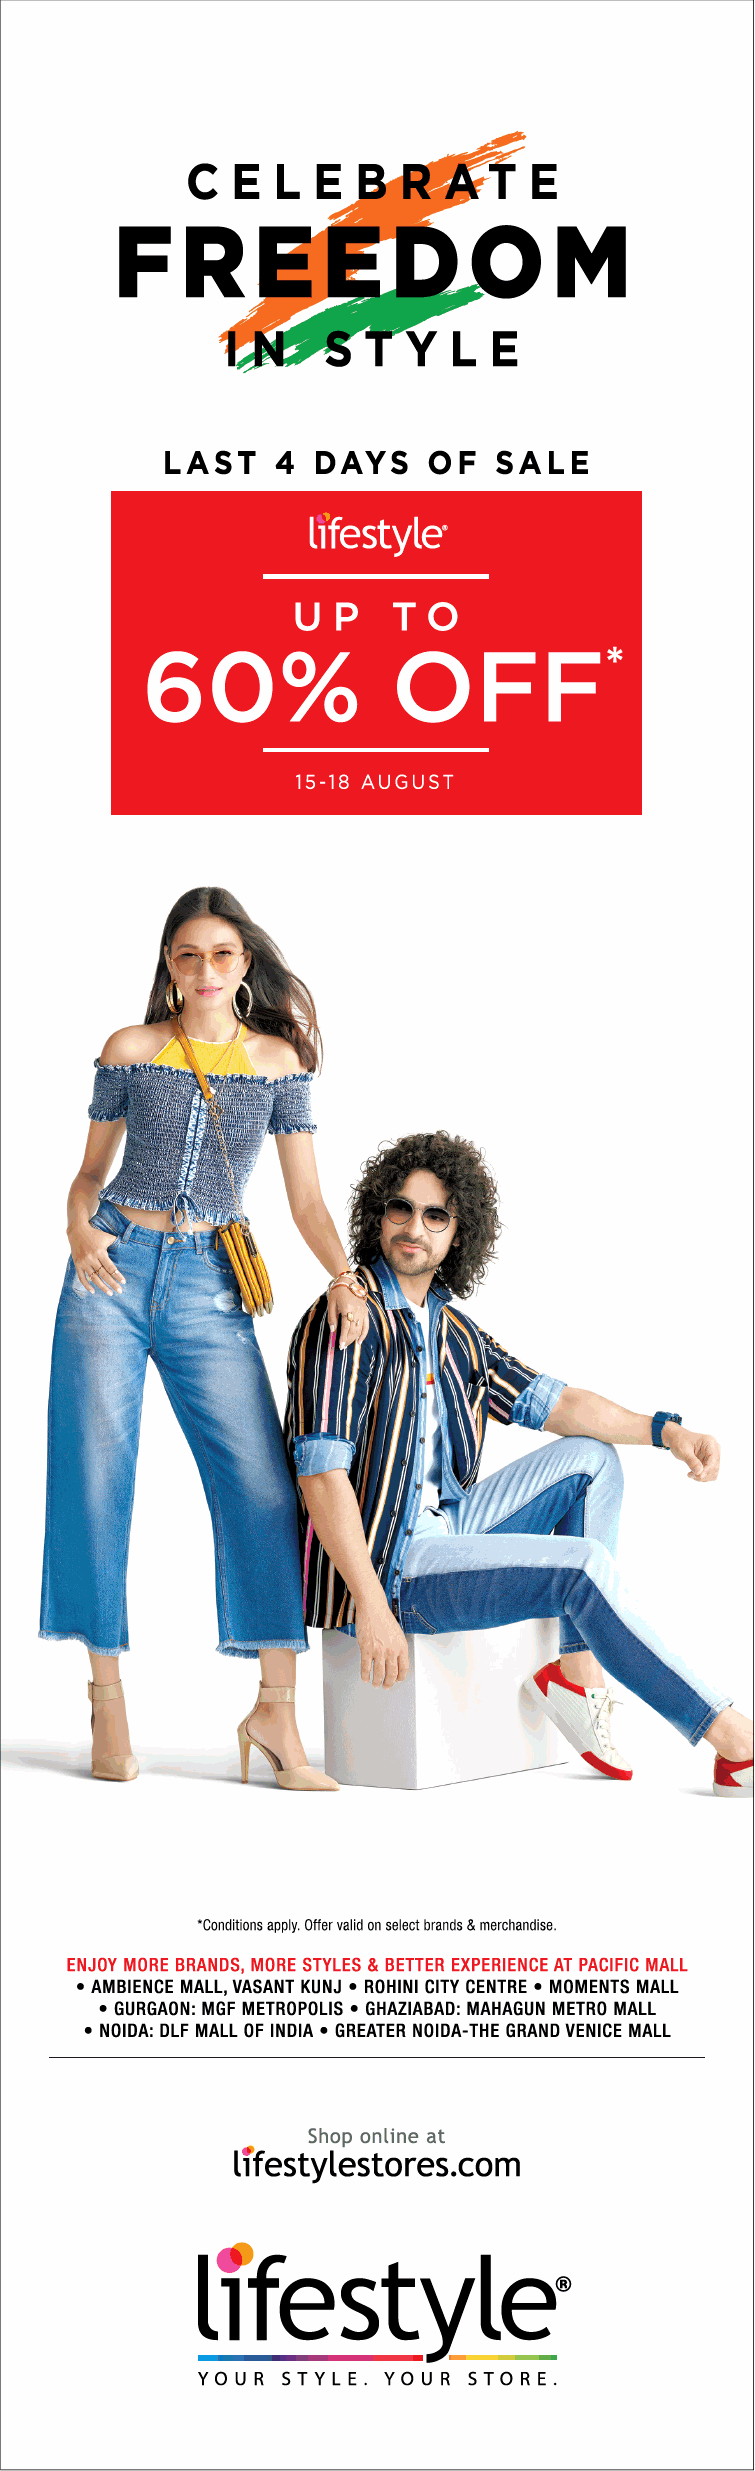 lifestyle-celebrate-freedom-in-style-upto-60%-off-ad-delhi-times-15-08-2019.png